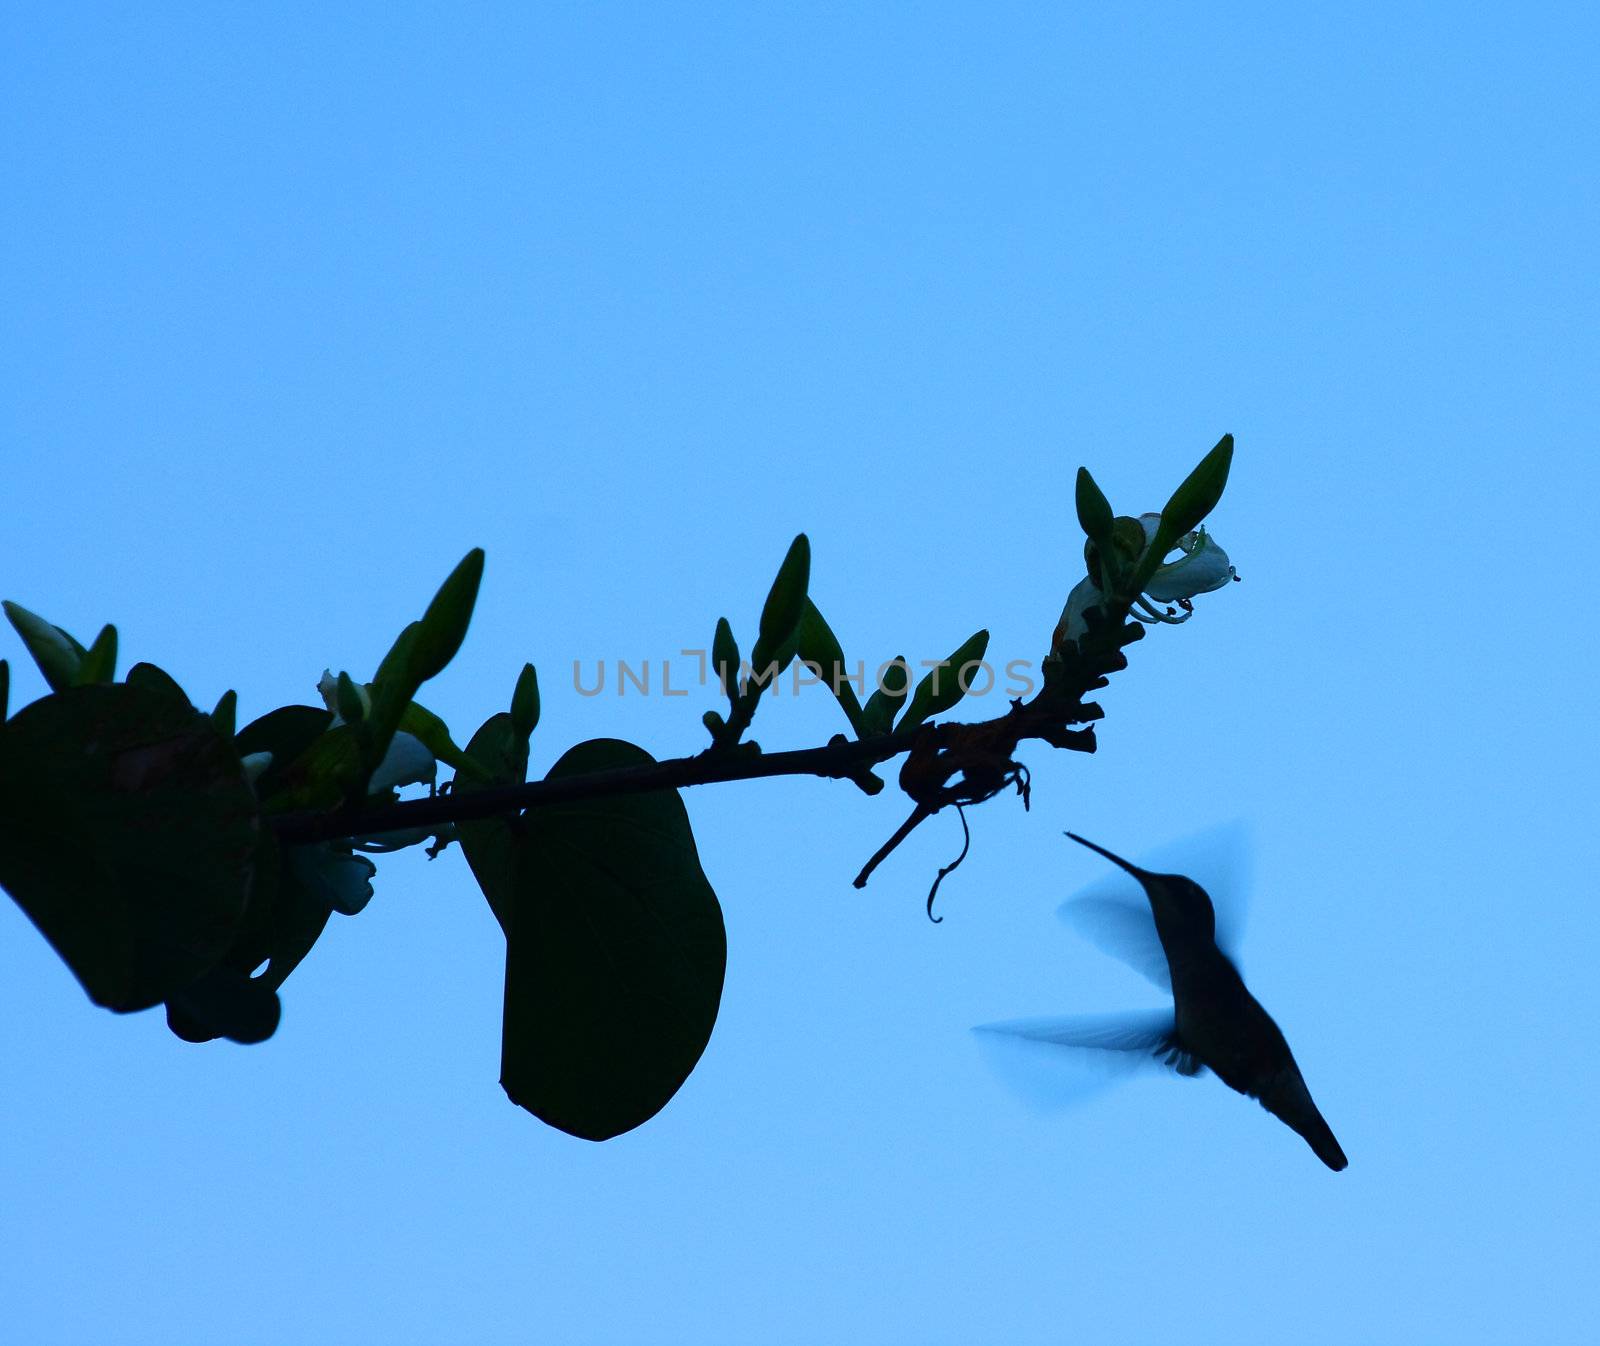 Humming Bird Silhouette by Geoarts